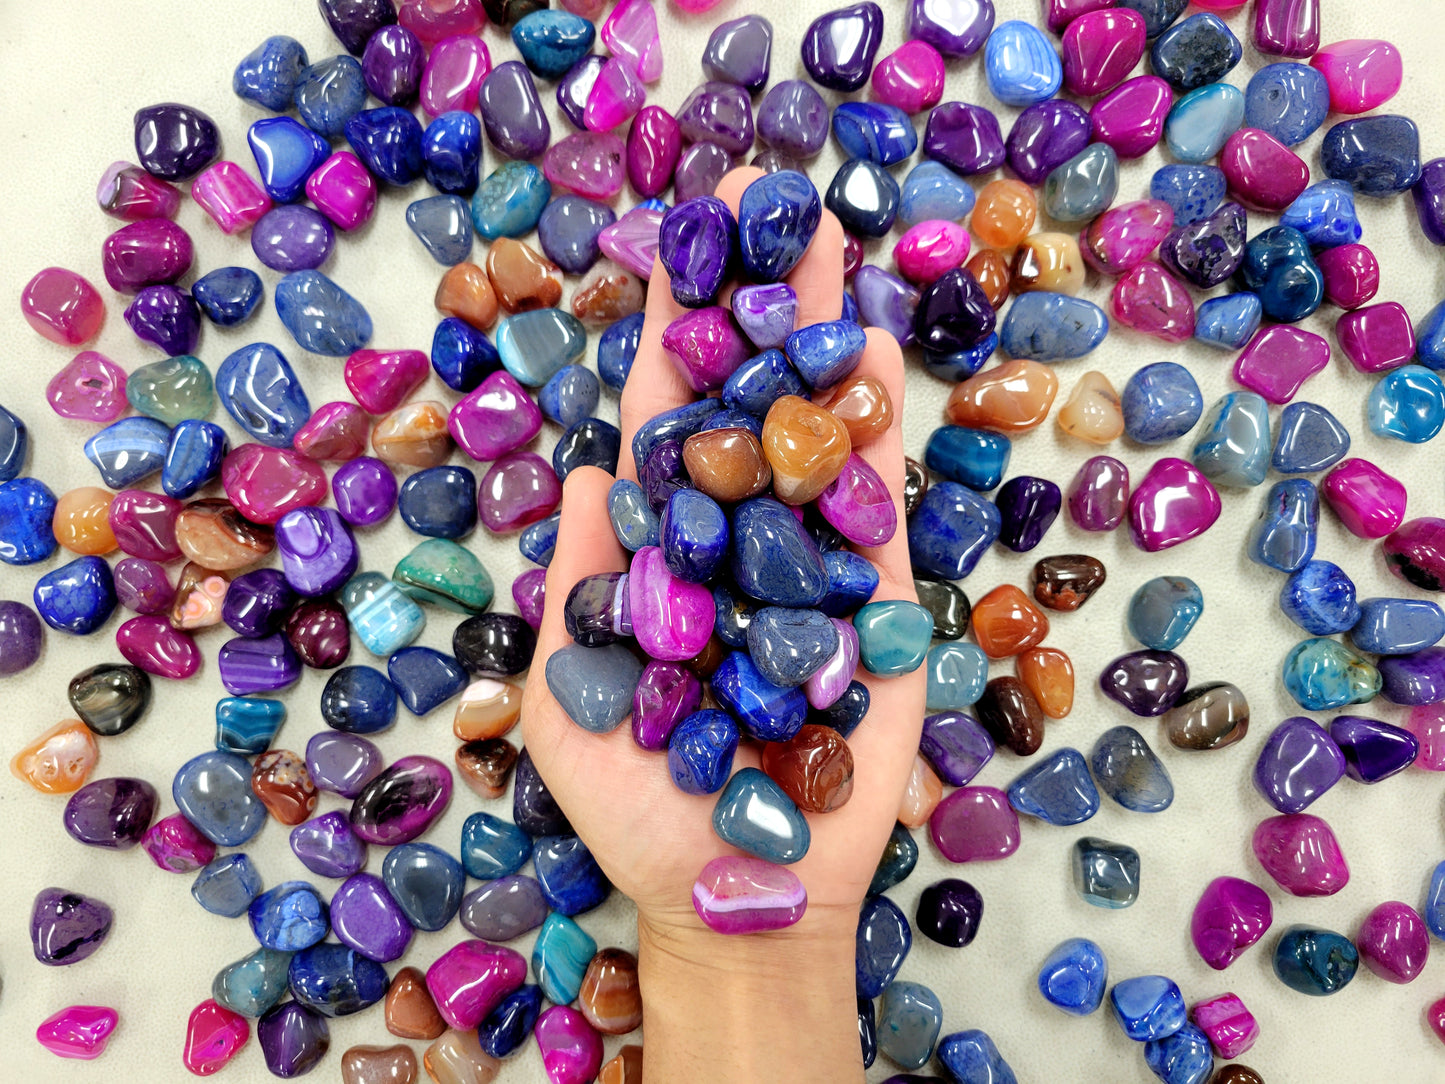 Dyed Agate Tumbled Stones Assorted Mix Polished Crystals